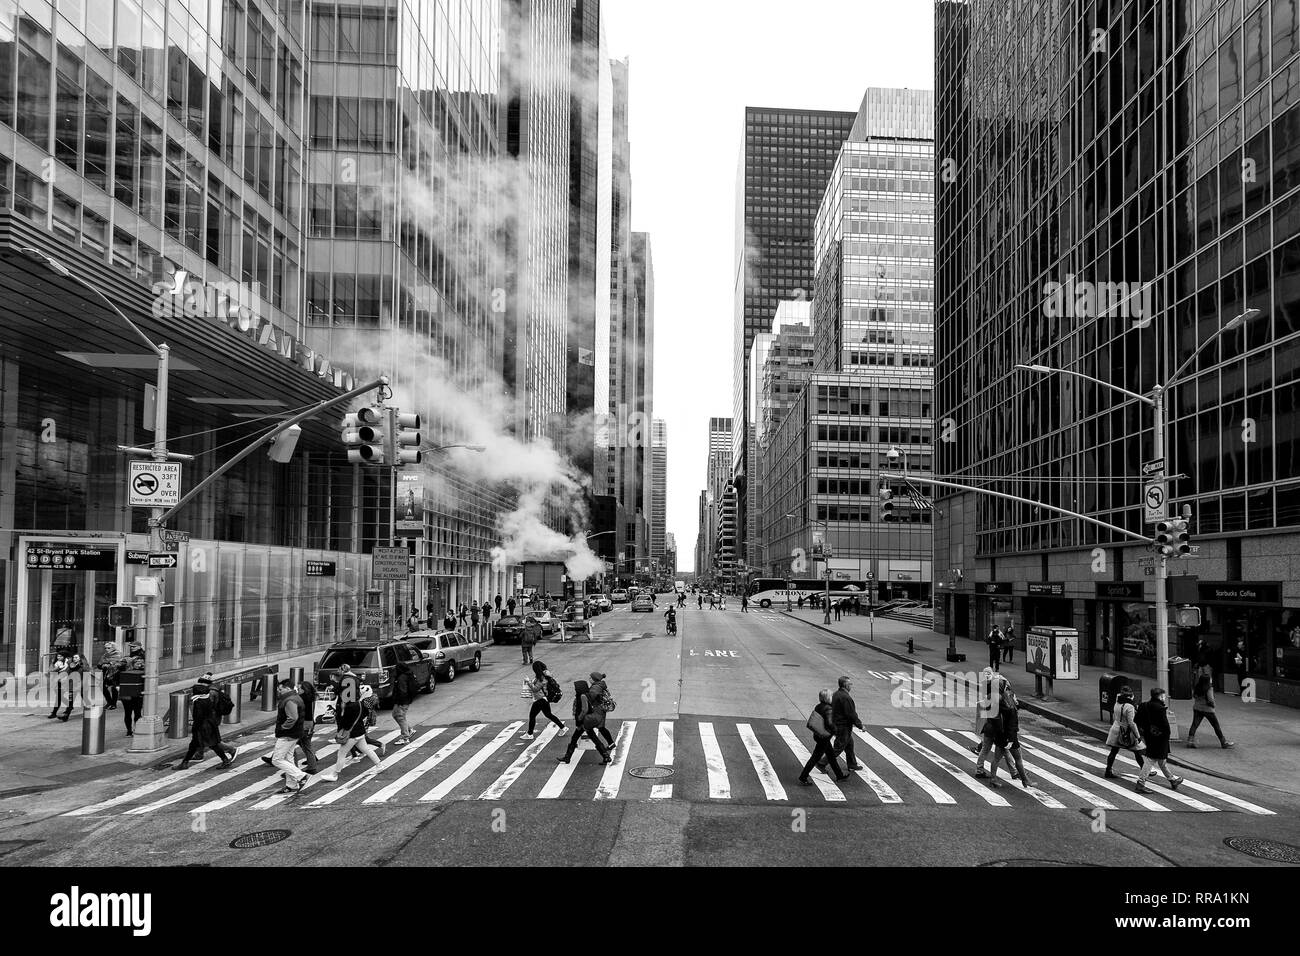 Shot of people crossing the road at 42 St and 6th Avenue, New York, taken from an open top bus. Stock Photo